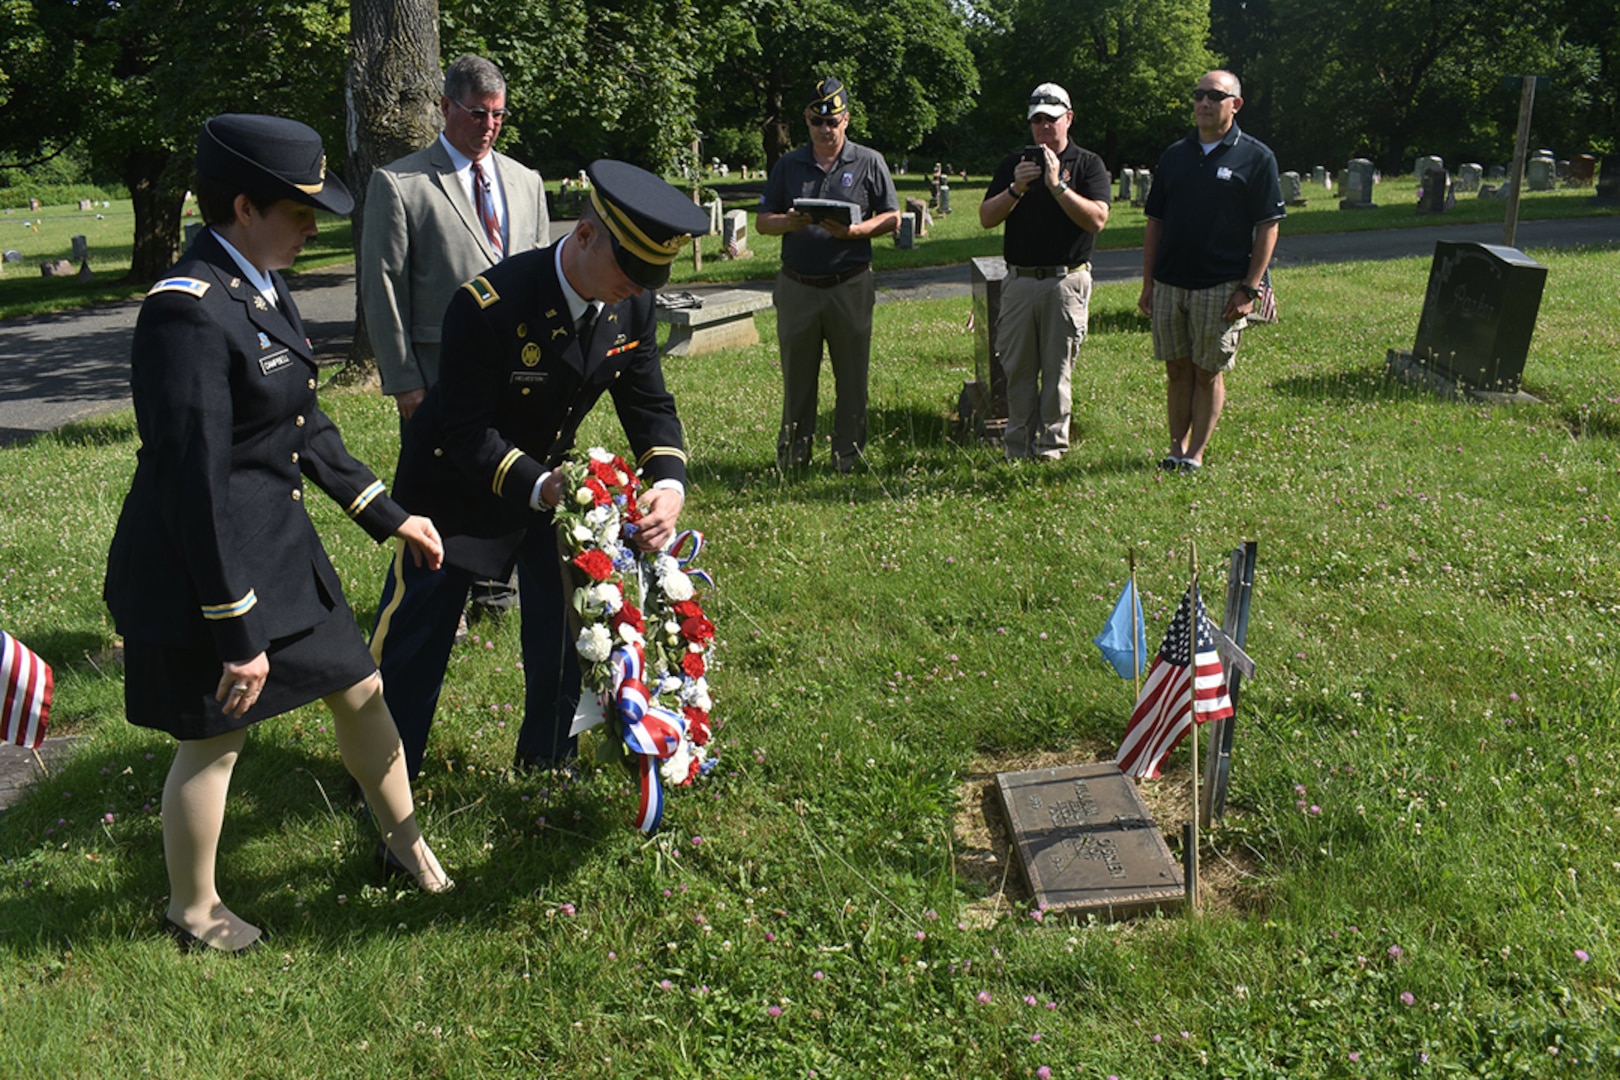 New York Army National Guard 1st Lts. Tiffany Campbell, left, and Thomas Helveston, lay a wreath at the grave site of Lt. Col. William O’Brien, at St. Peters Cemetery, Troy, N.Y., on July 7, 2019. Medal of Honor recipient William O’Brien was remembered for his service with the 27th Division during the Battle of Saipan, 75 years after the attack.